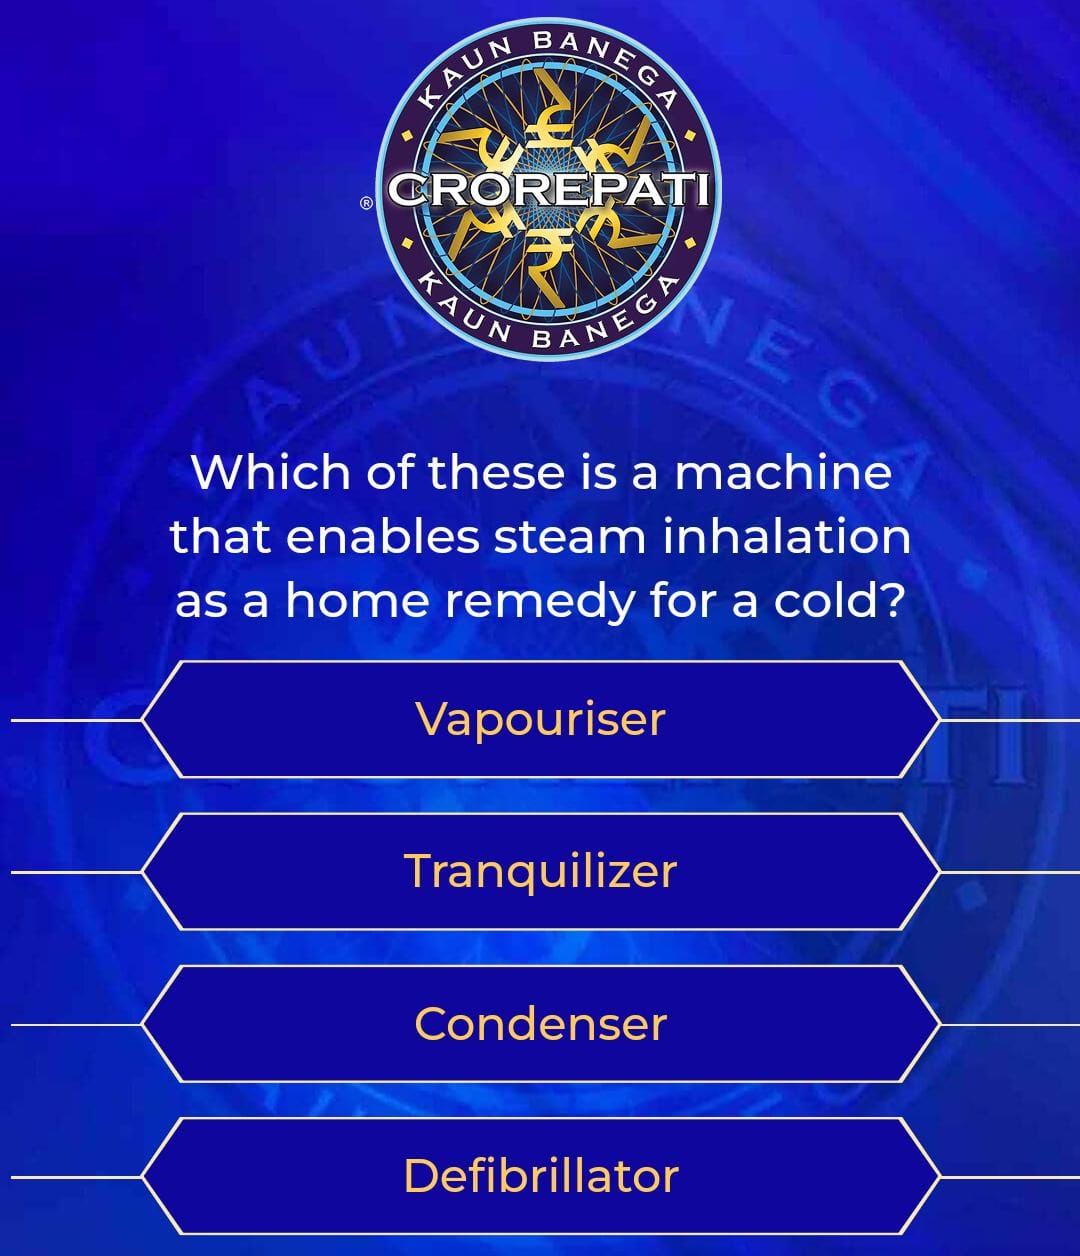 Which of these is a machine that enables steam inhalation as a home remedy for a cold